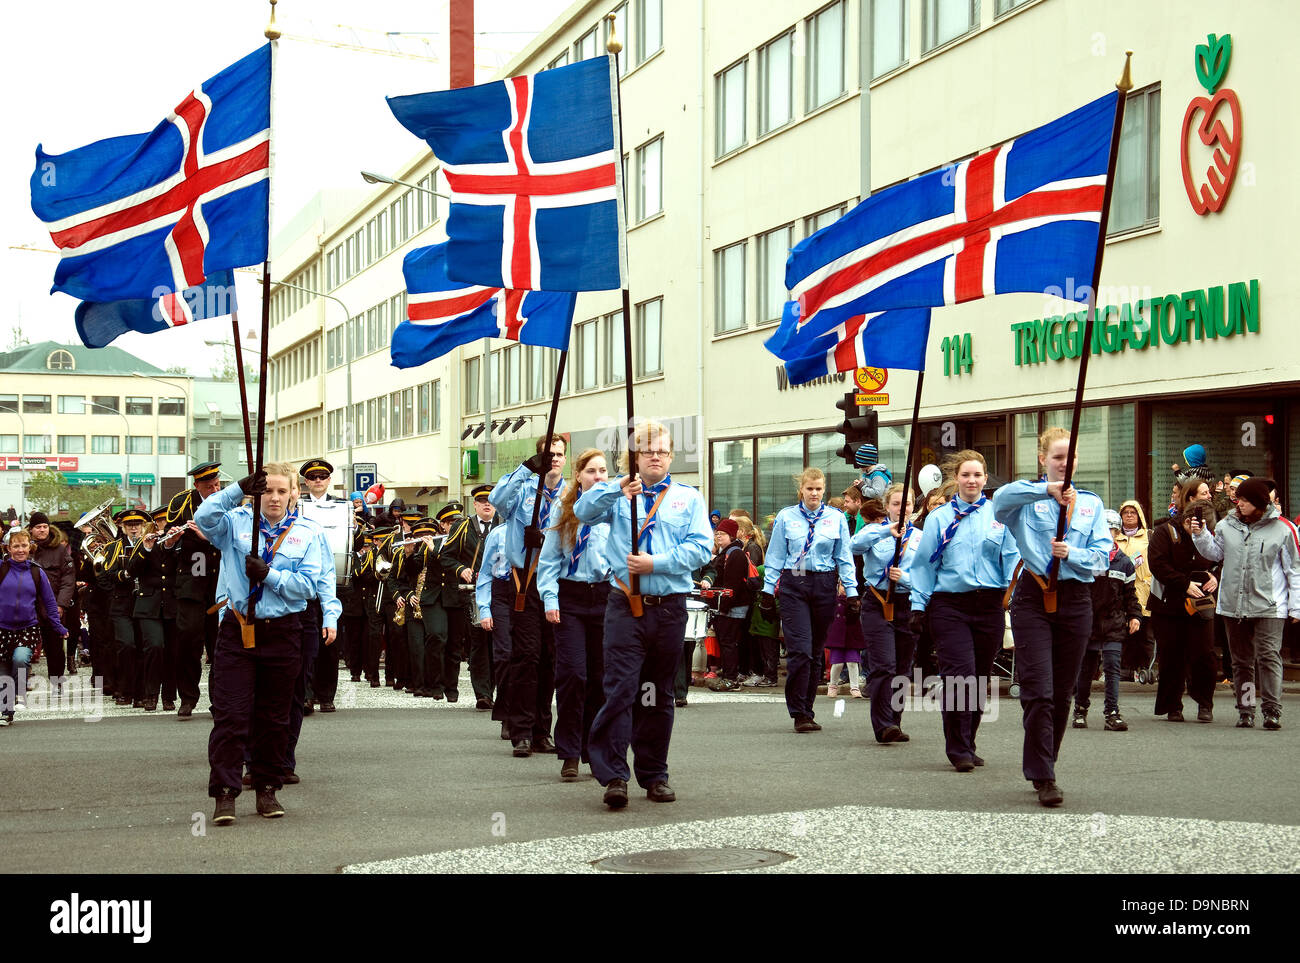 On Iceland's National Day a Scout group, male and female, marches in central Reykjavik, holding national flags Stock Photo